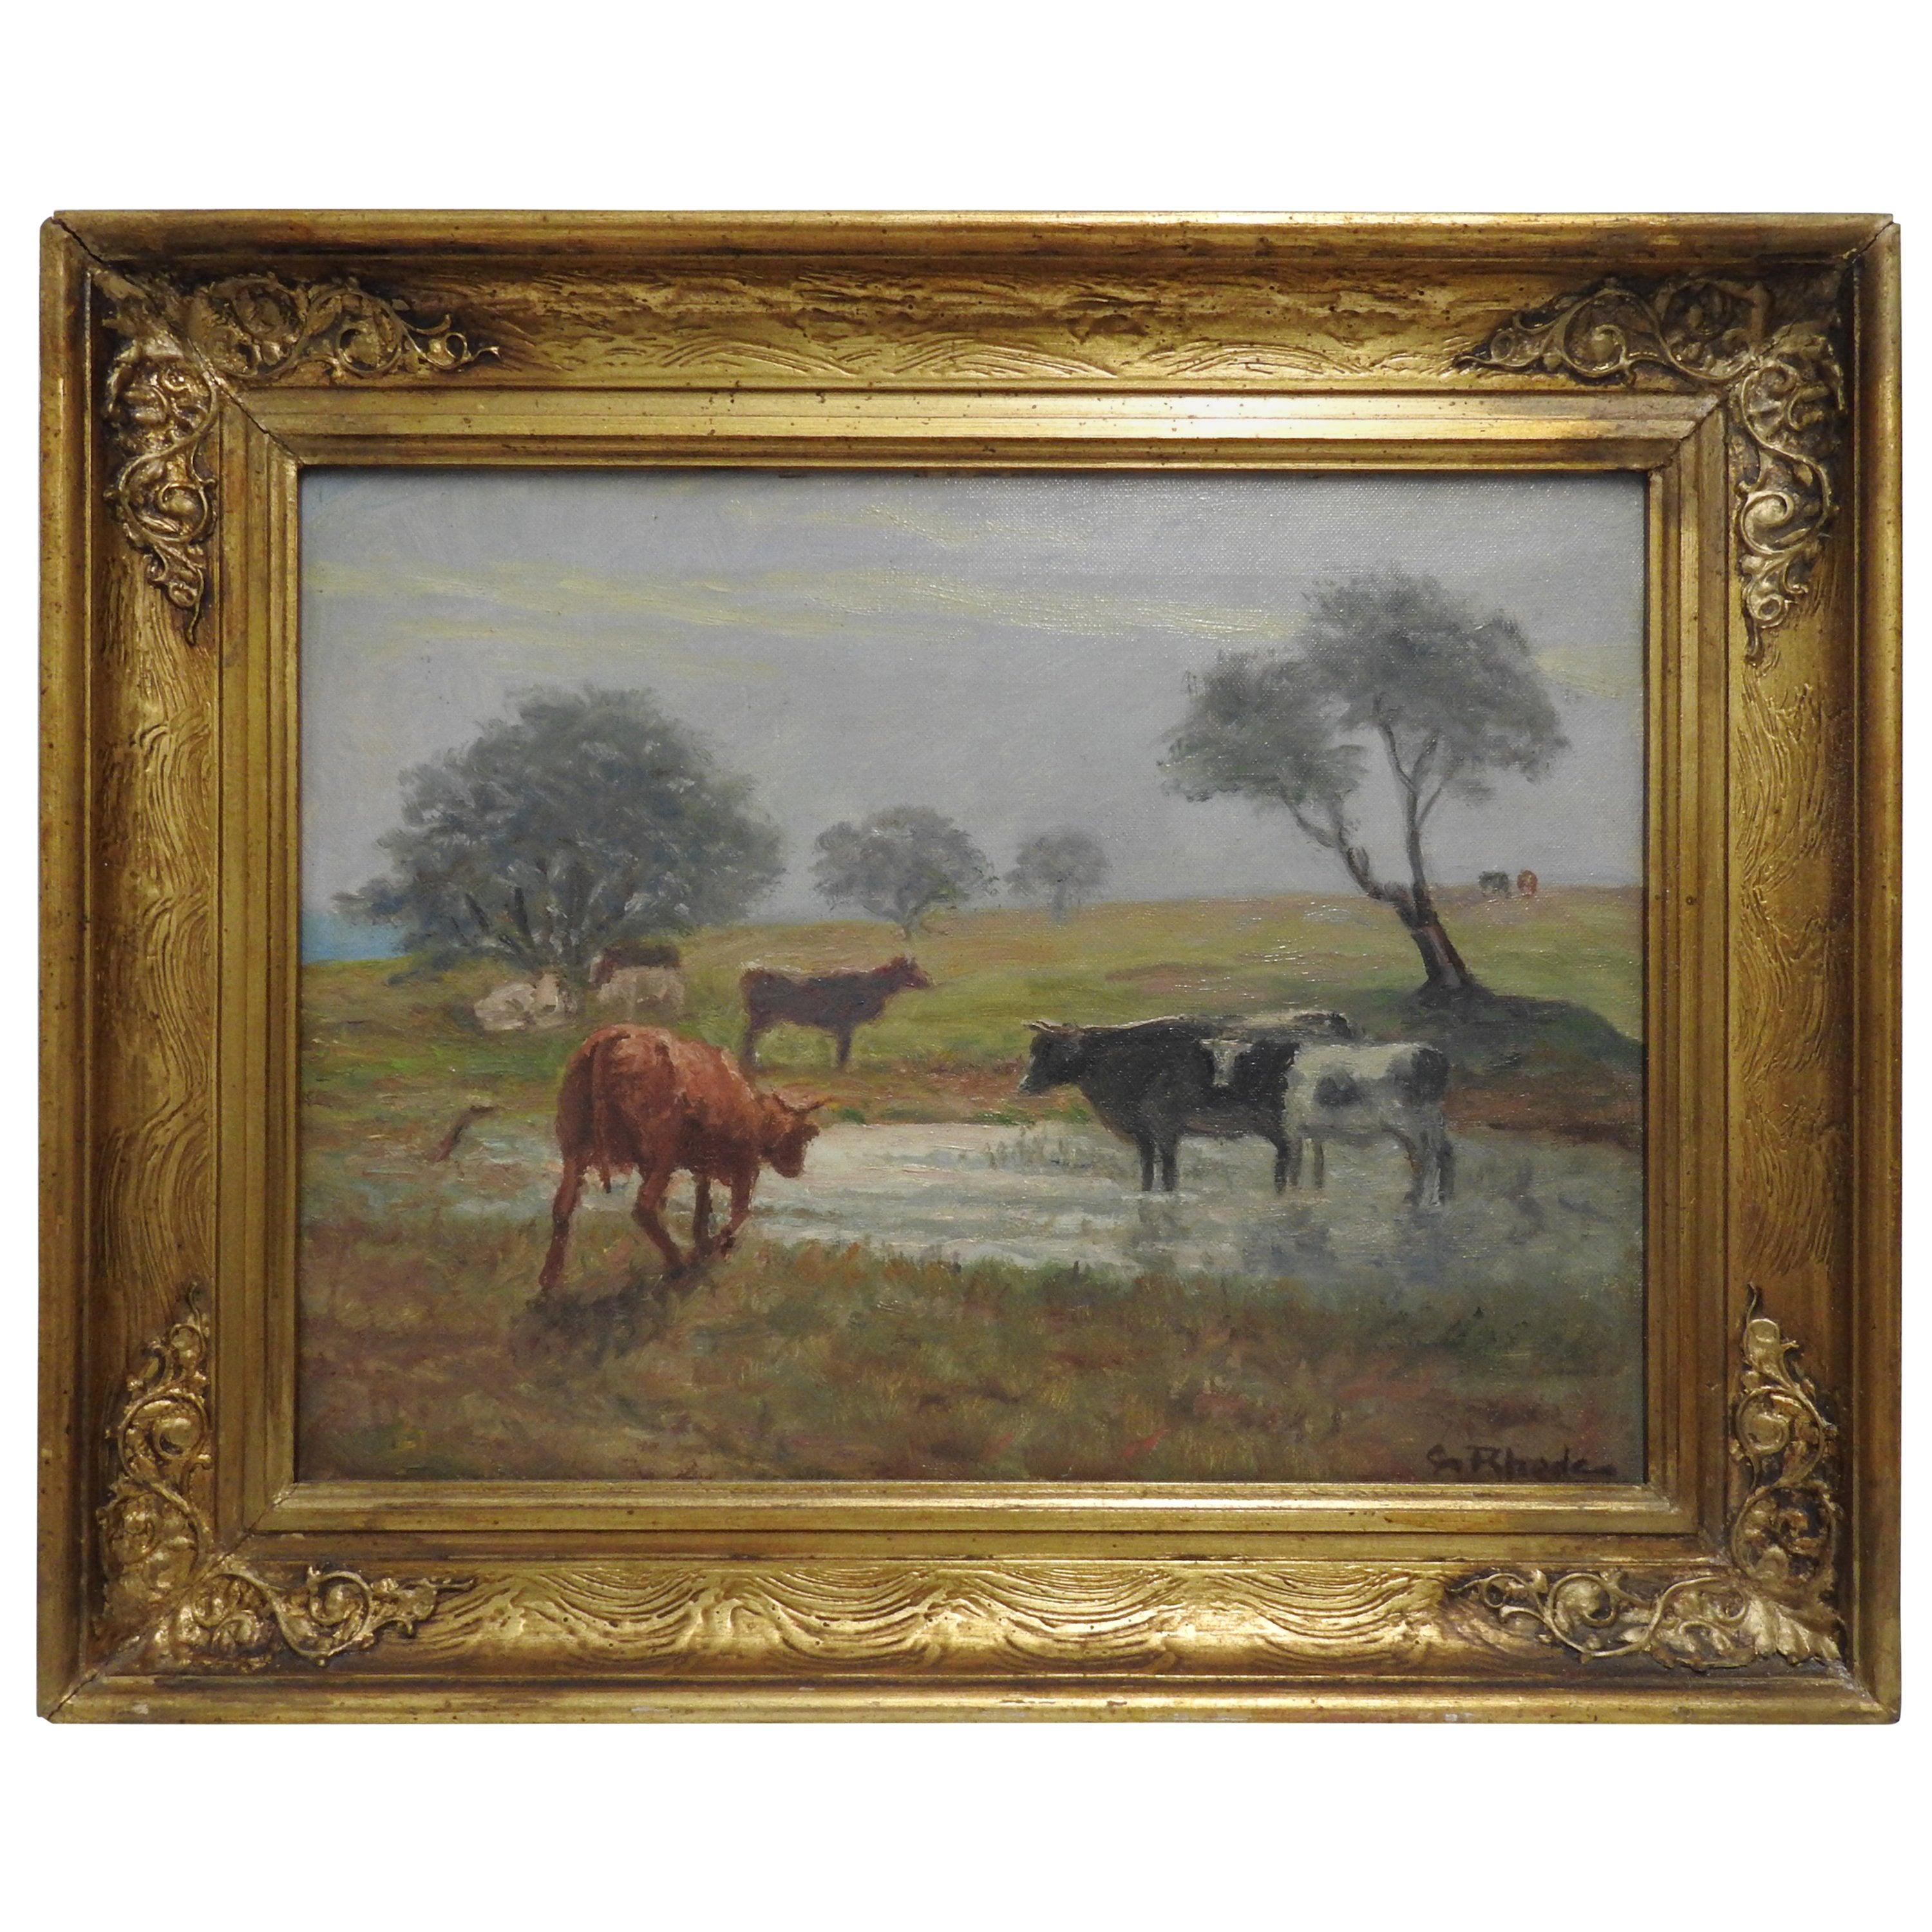 This is lovely oil on canvas of a country landscape. The work depicts a group of cows grazing in a field with a pond. This piece appears to be signed “G Rhede” on lower right of the canvas, but an accurate artist attribution could not be made for